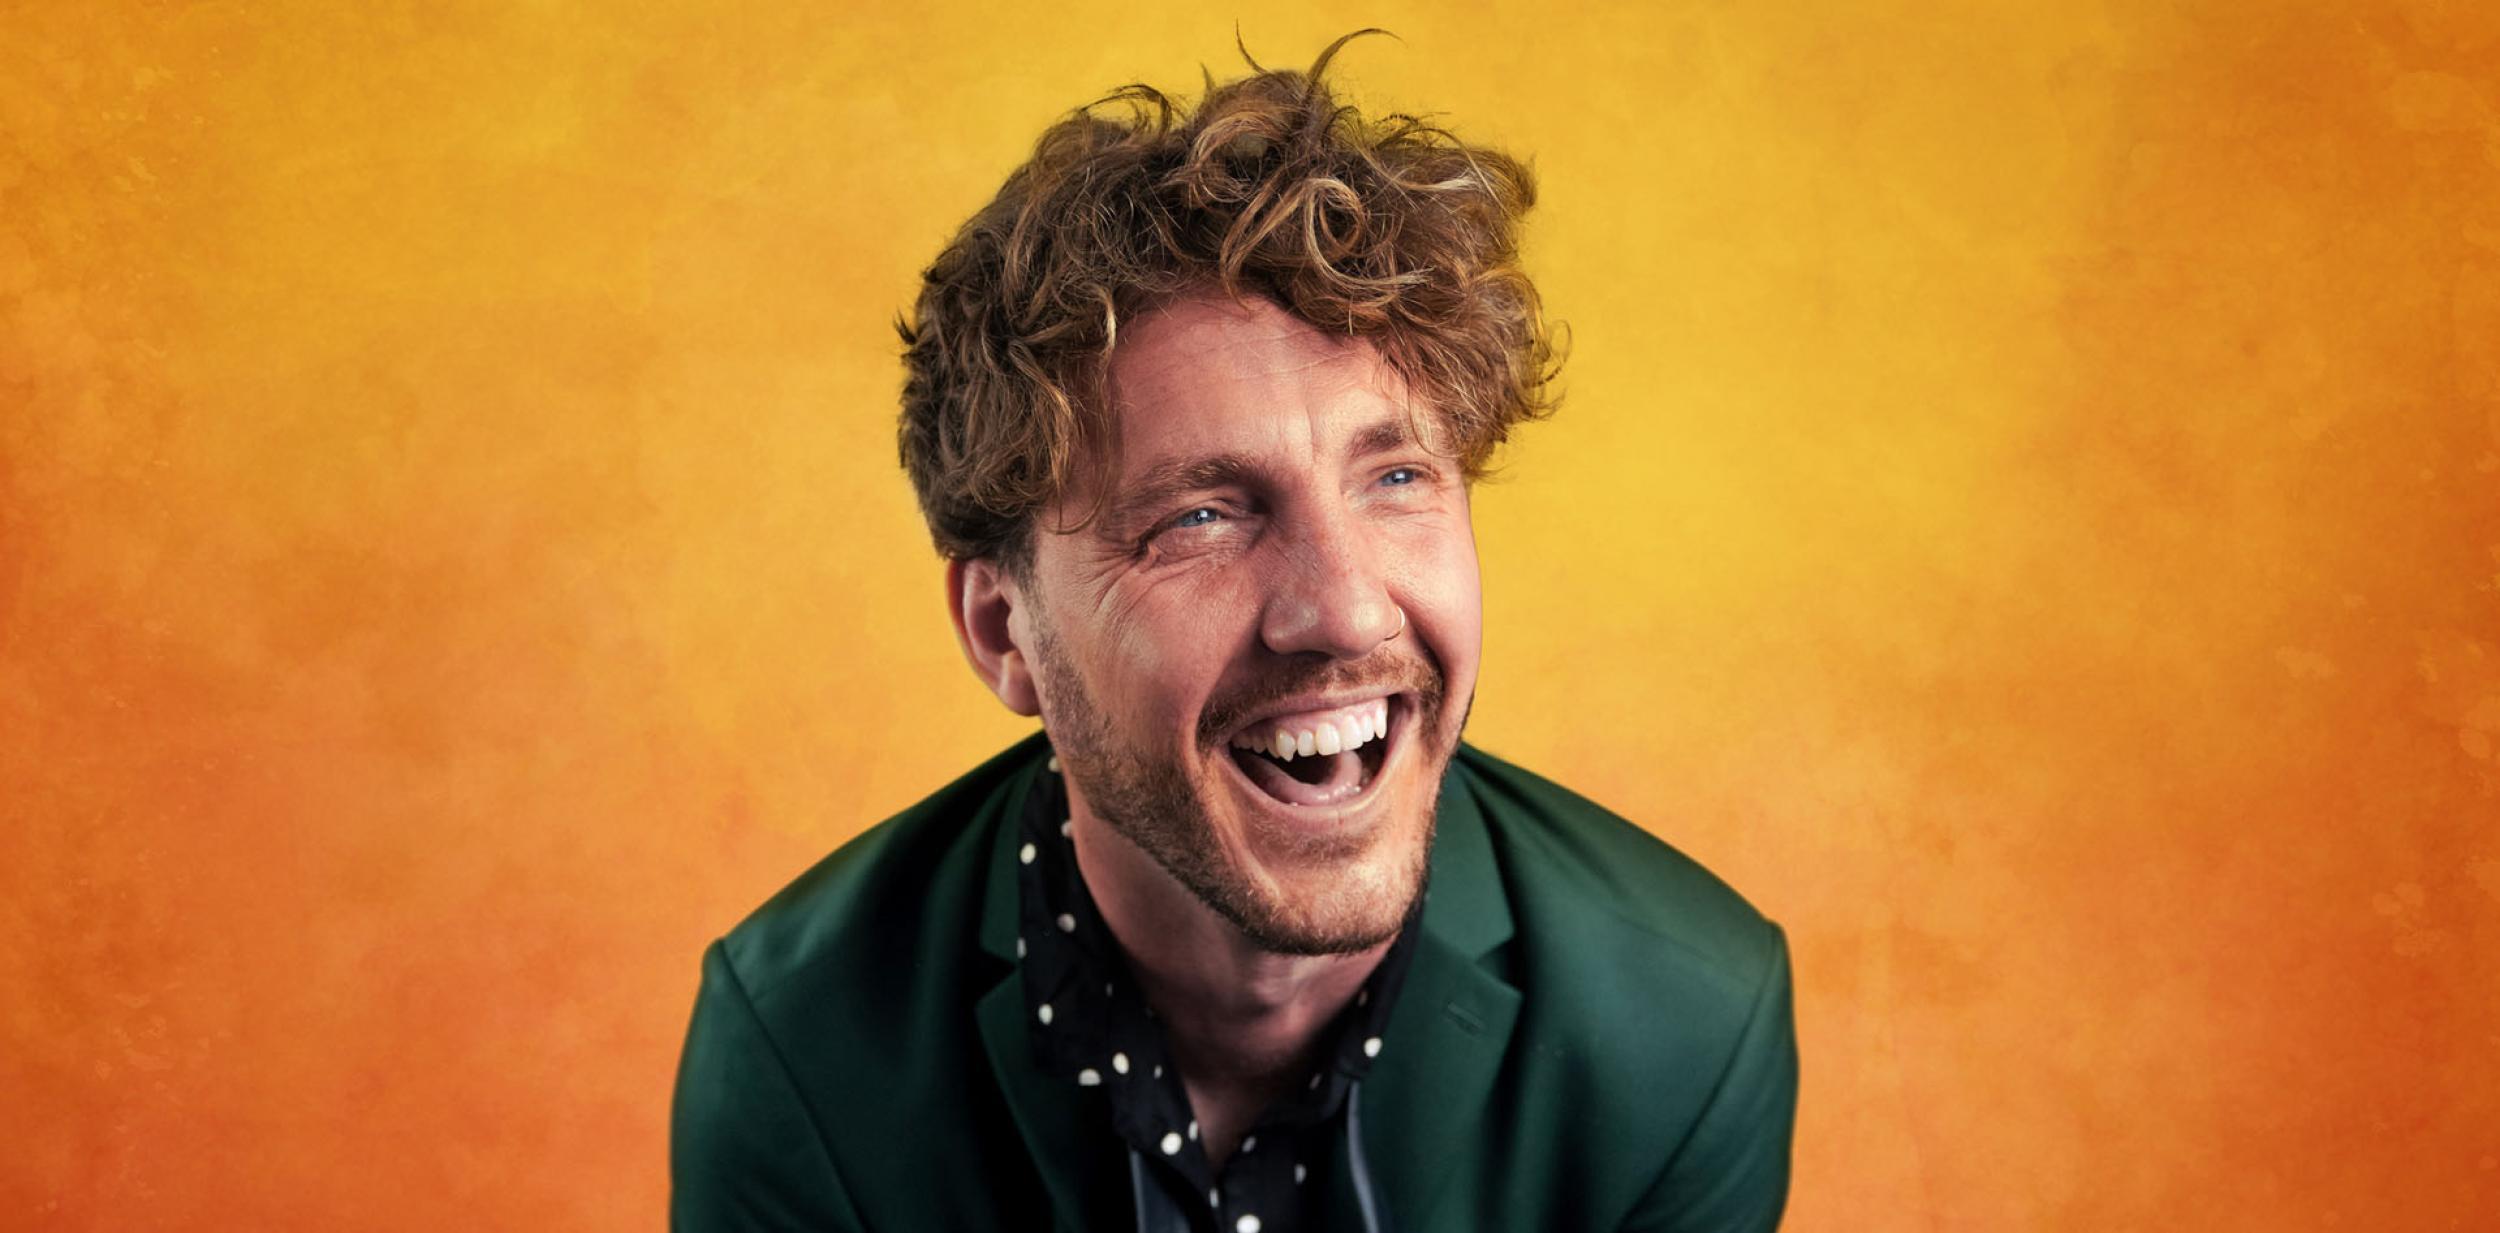 Man with curly hair laughing looking to the right, in a dark green informal suit with a yellow background